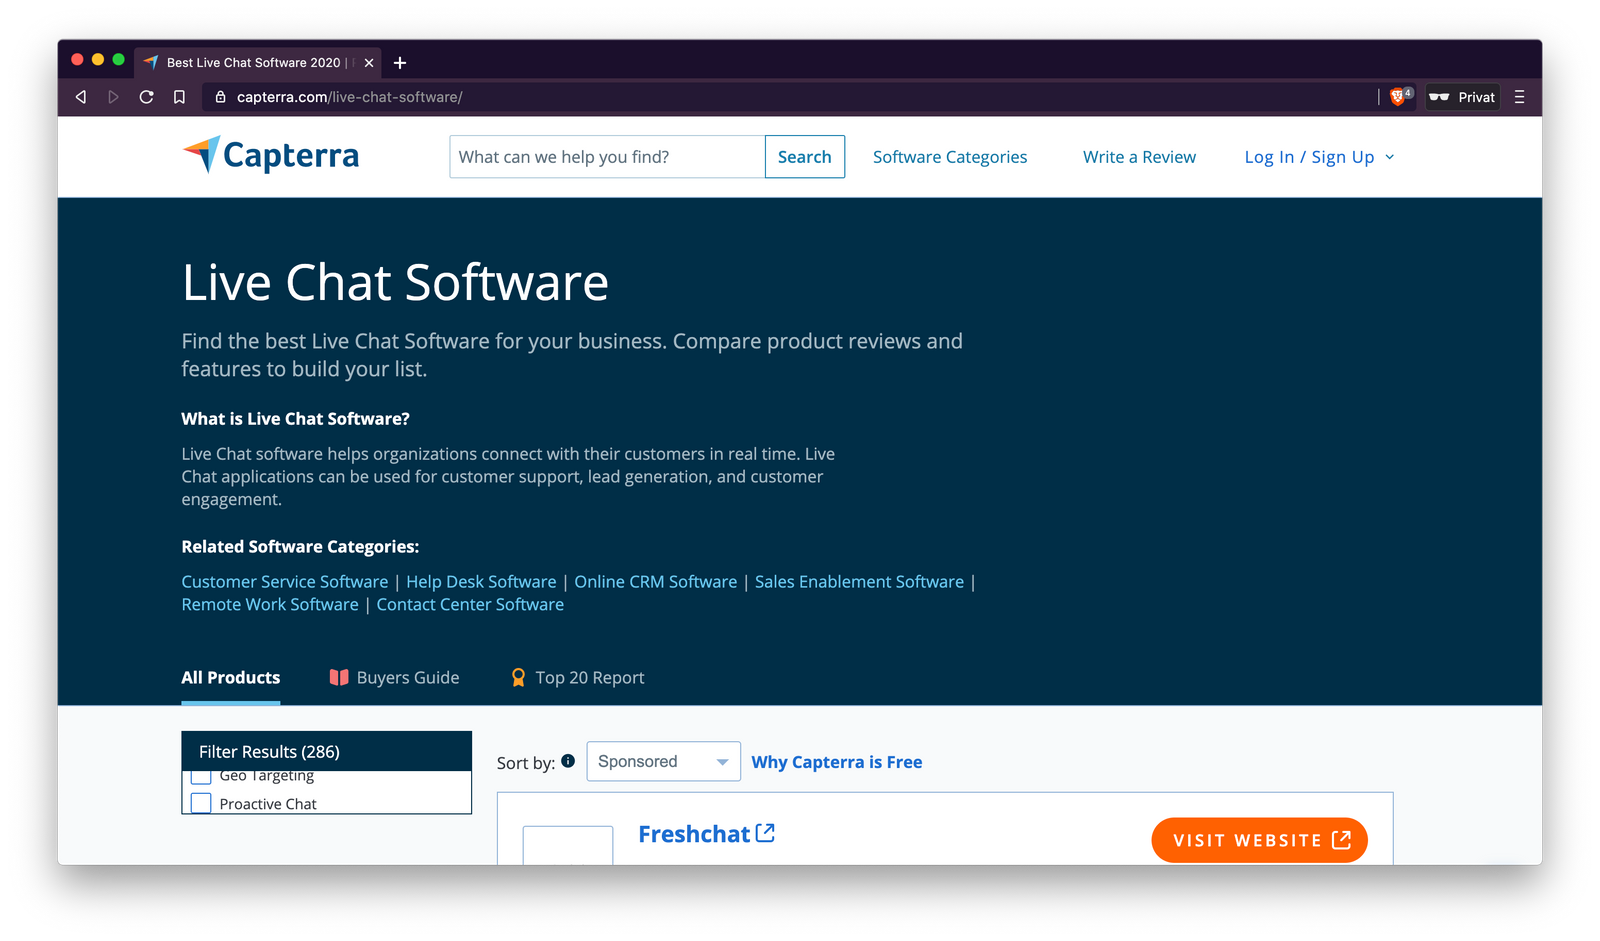 The "Live Chat Software" category on Capterra